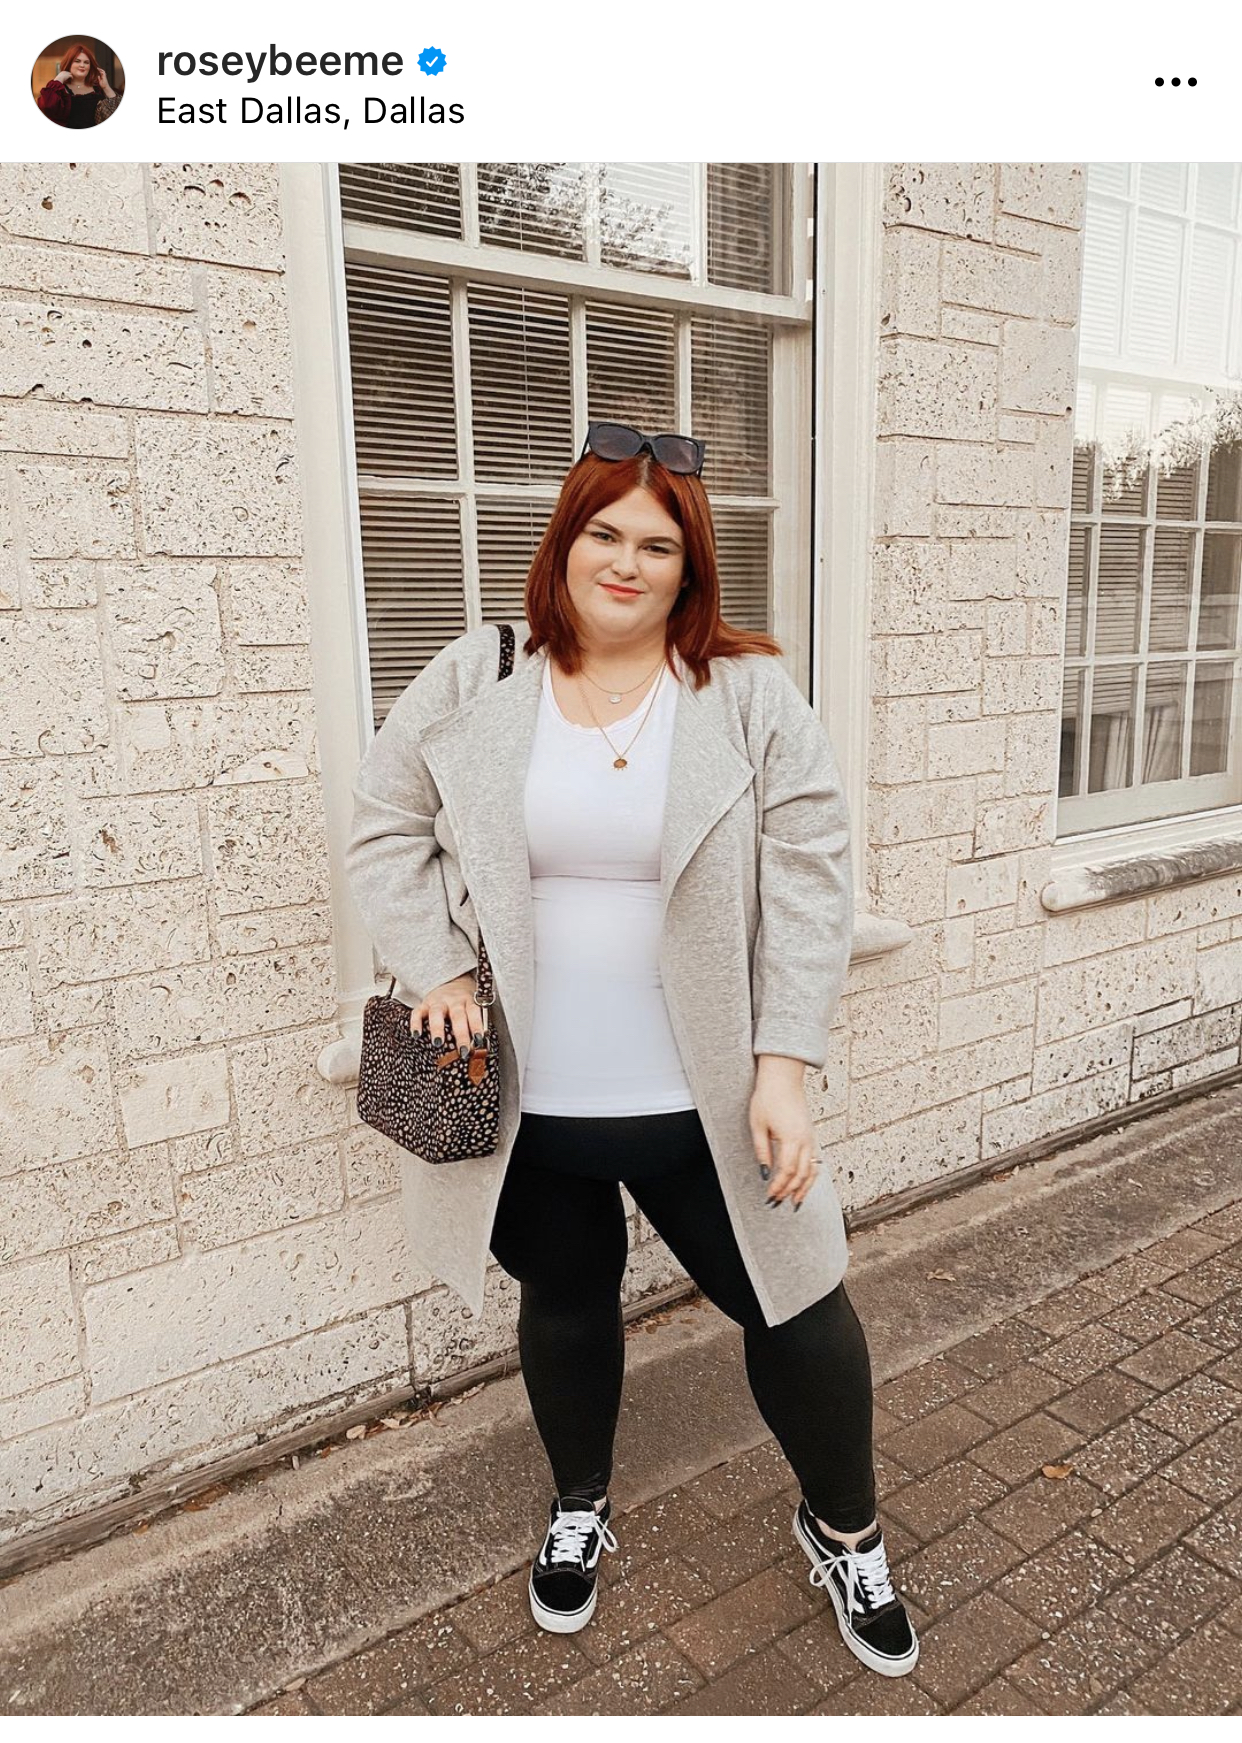 The Modern Way To Wear Leggings After 50  Plus size legging outfits,  Leggings outfit casual, Women leggings outfits